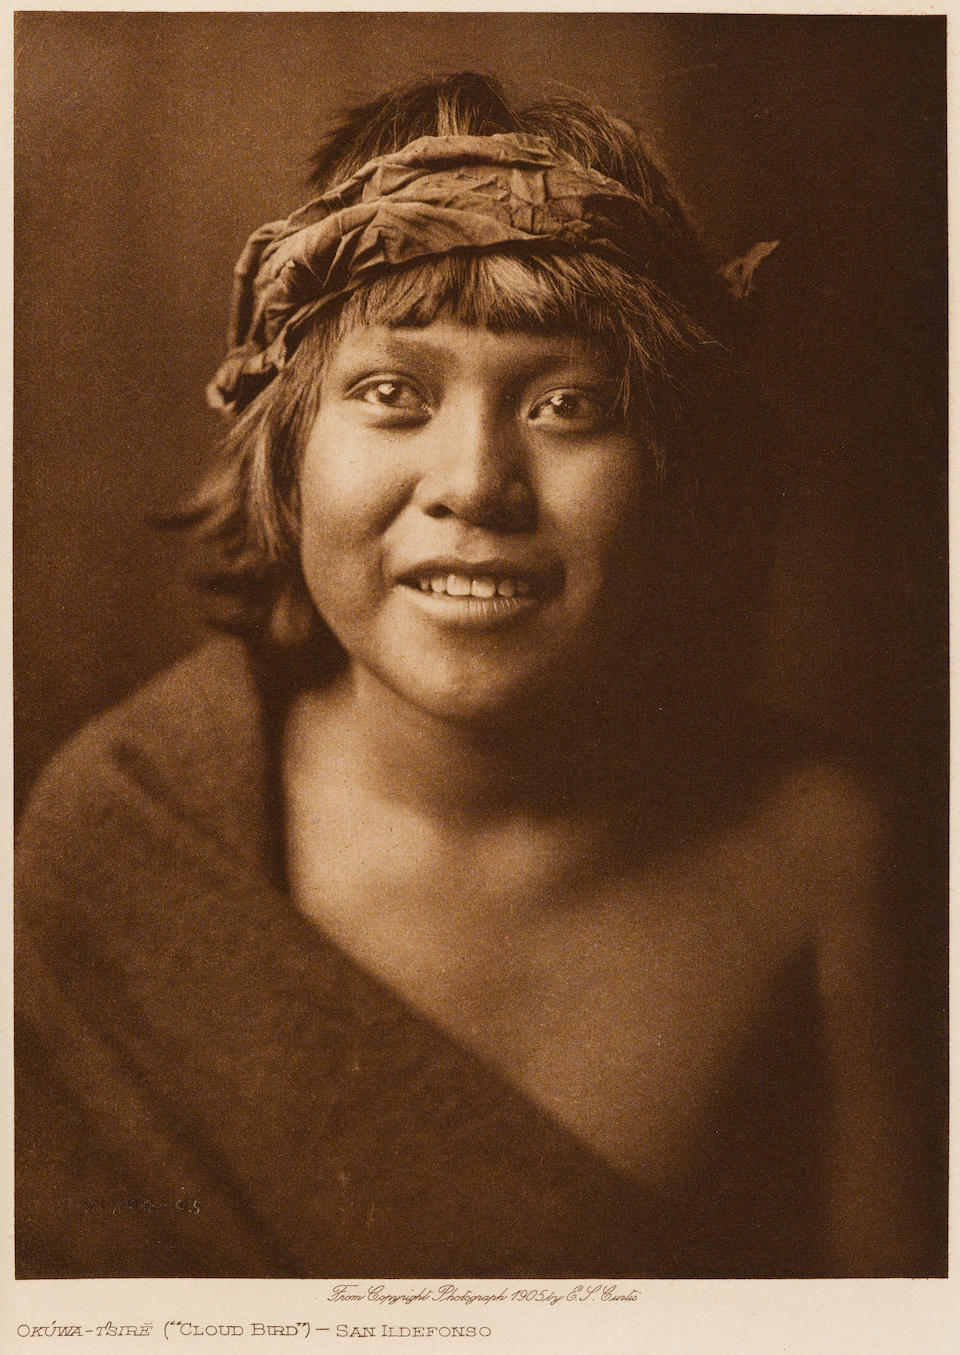 Edward S. Curtis (American, 1868-1952); The North American Indian, Volume 17;